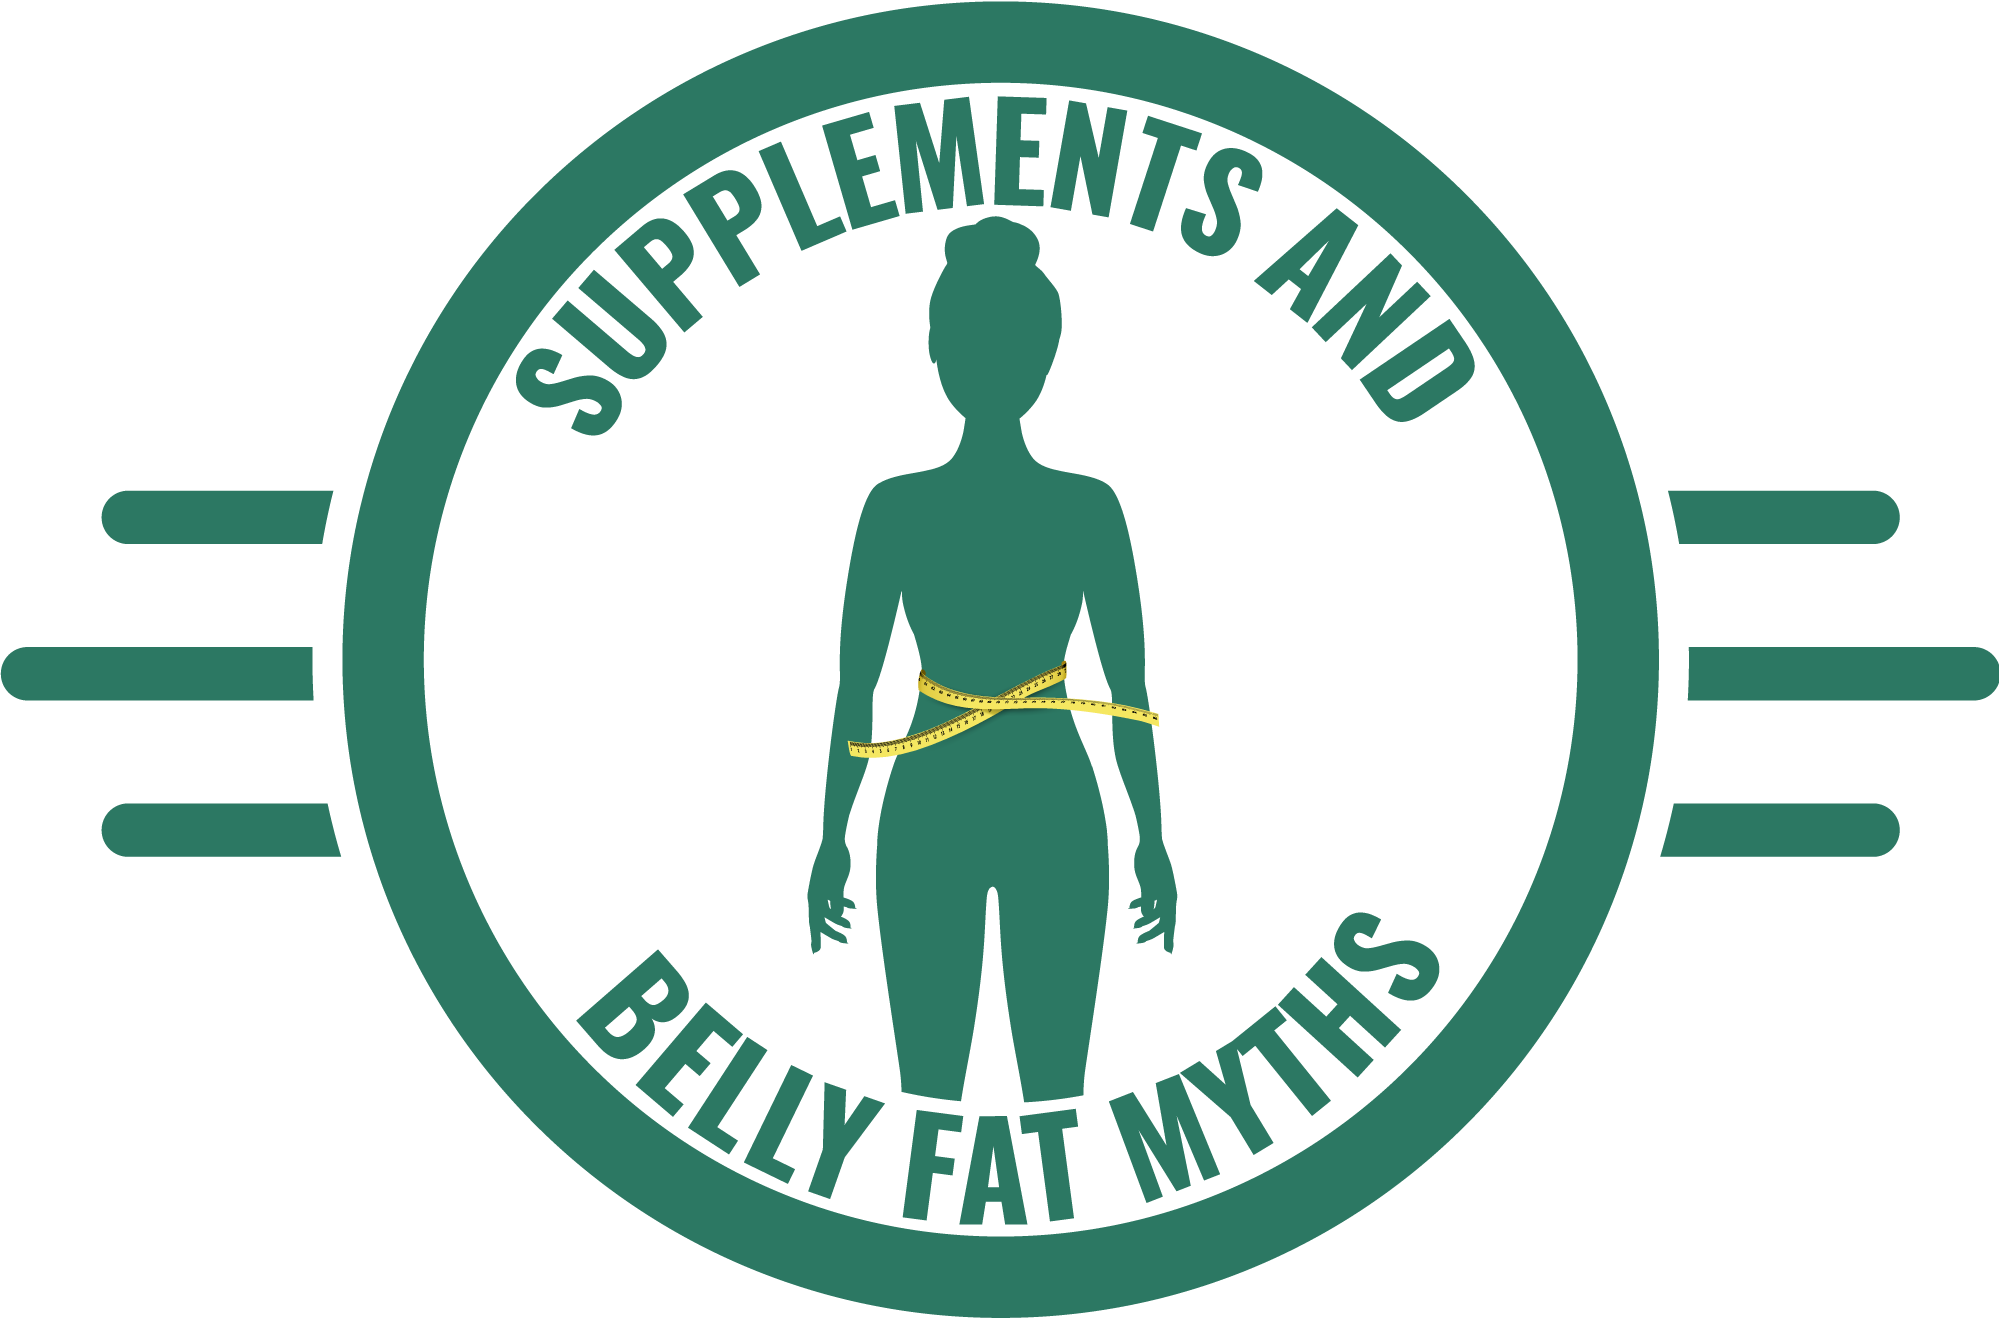 Supplements and Belly Fat Myths